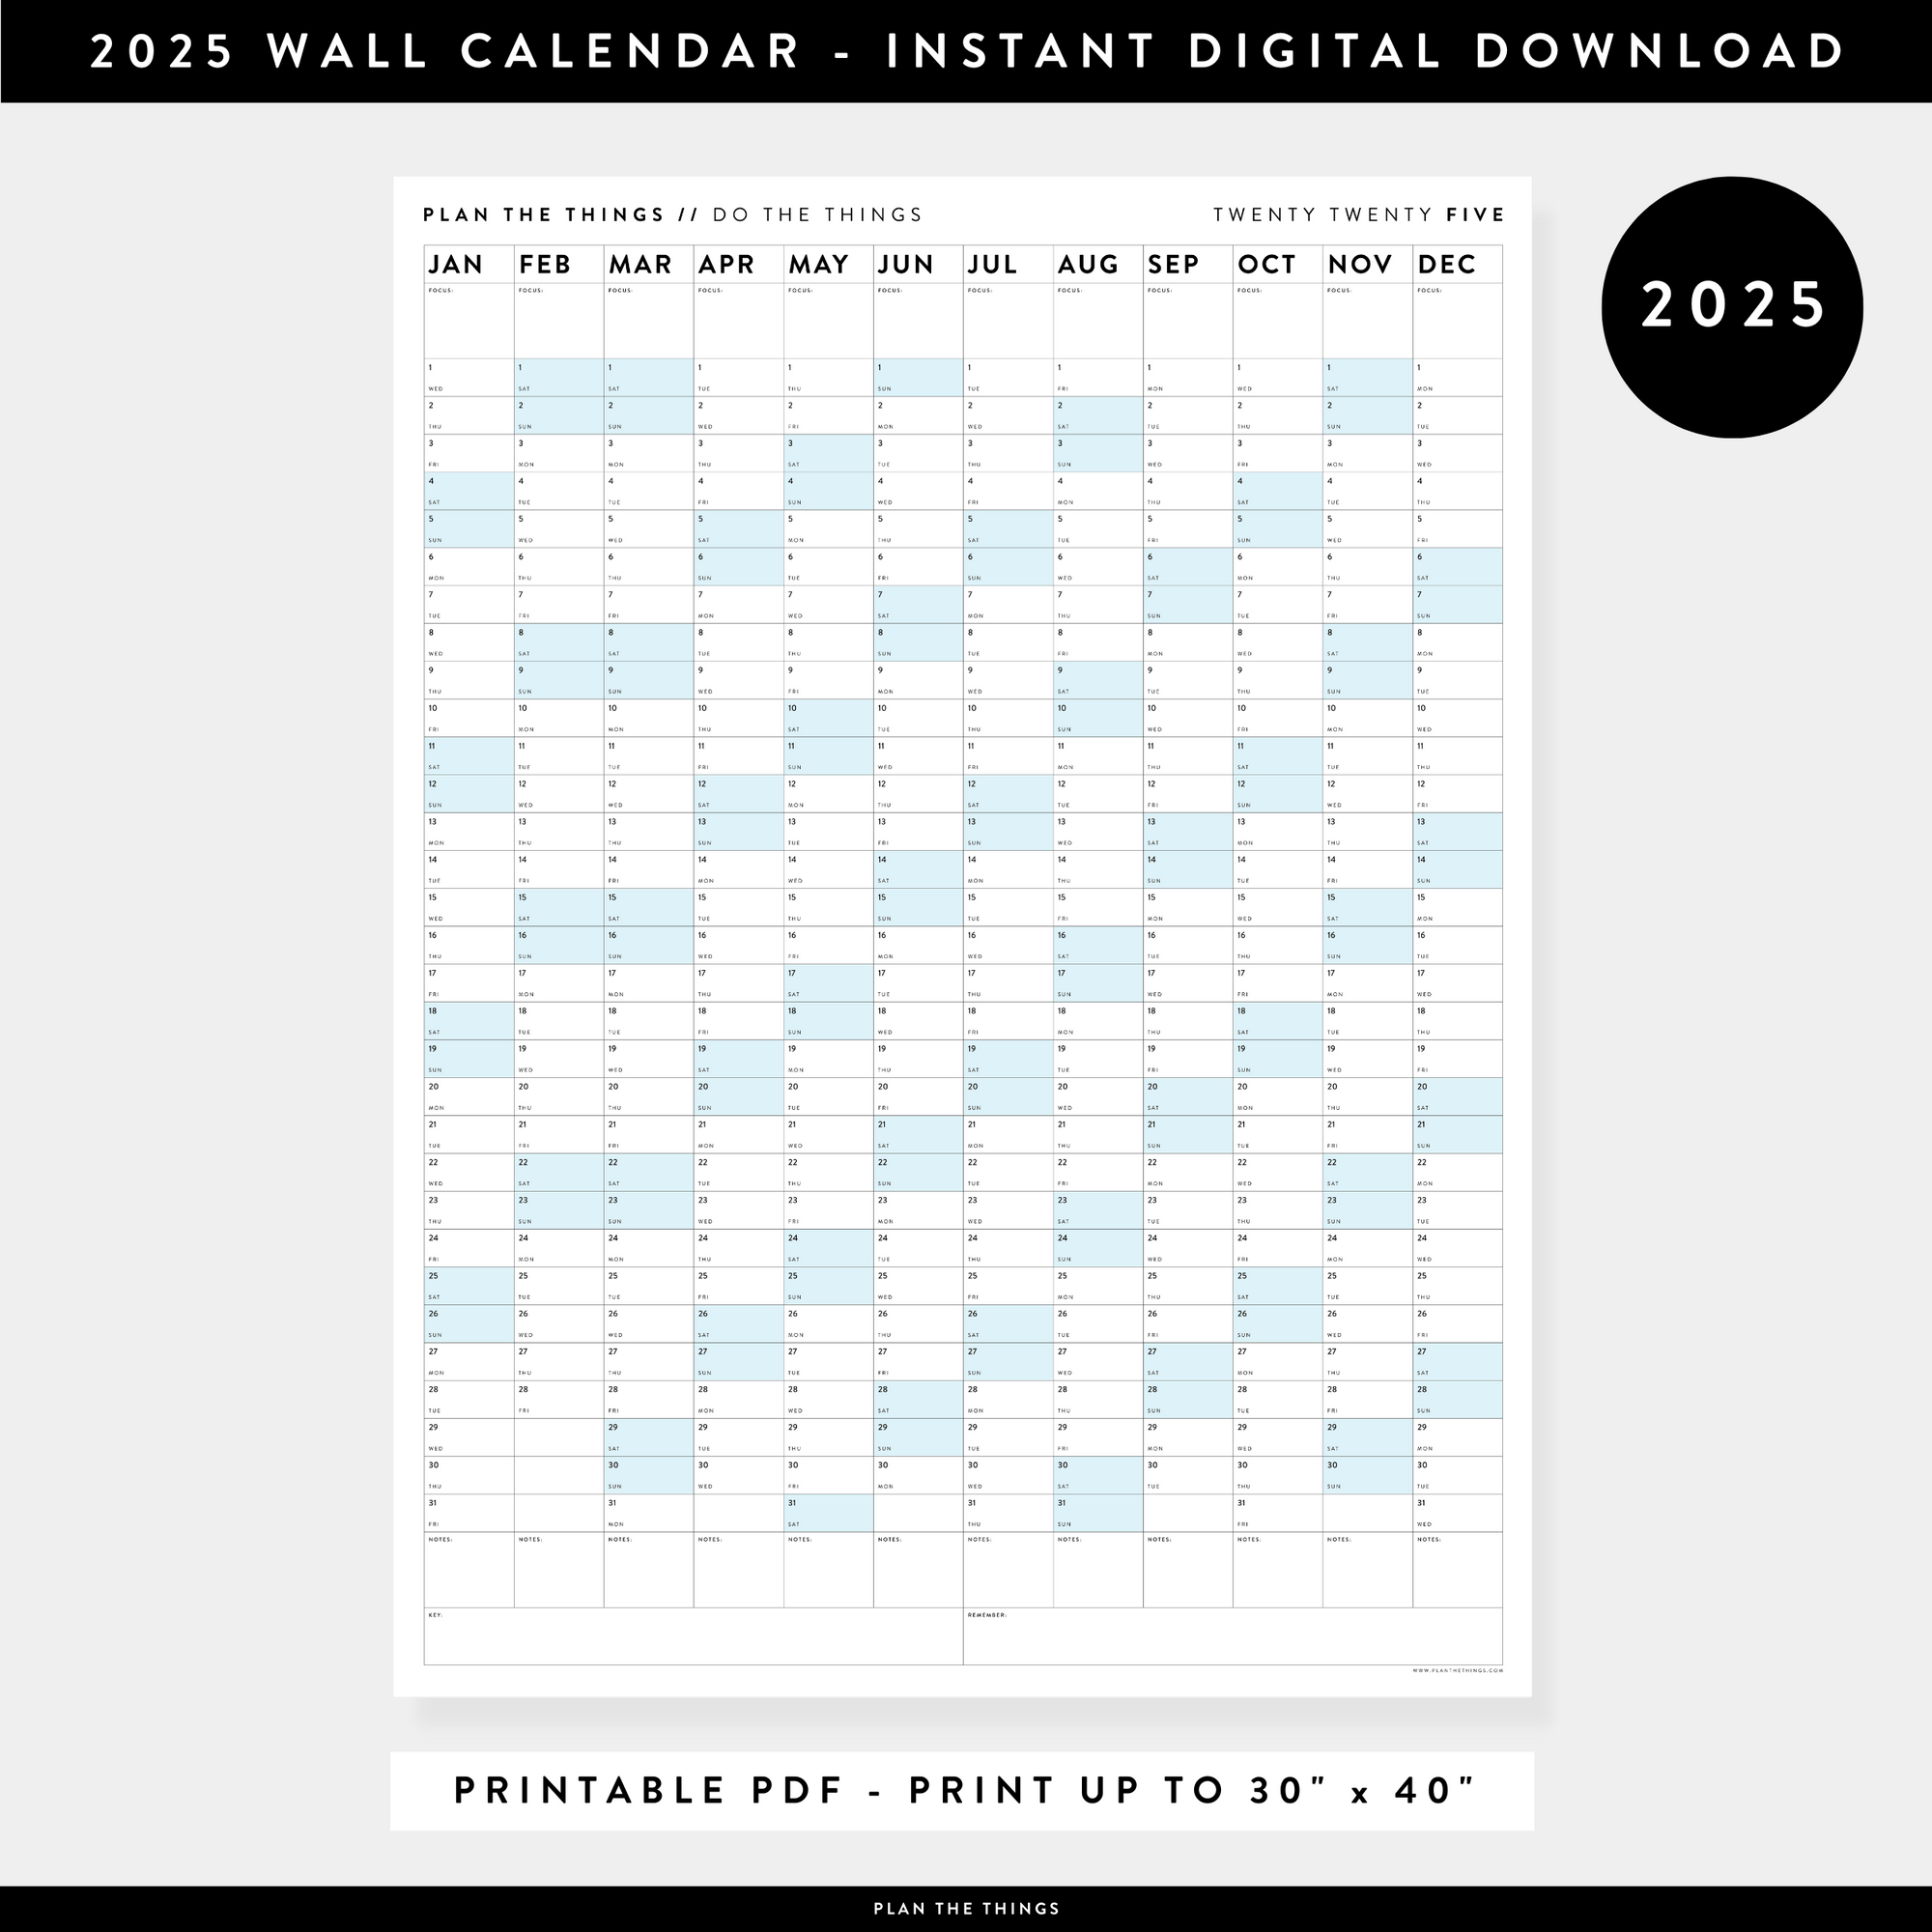 PRINTABLE VERTICAL 2025 WALL CALENDAR WITH BLUE WEEKENDS - INSTANT DOWNLOAD